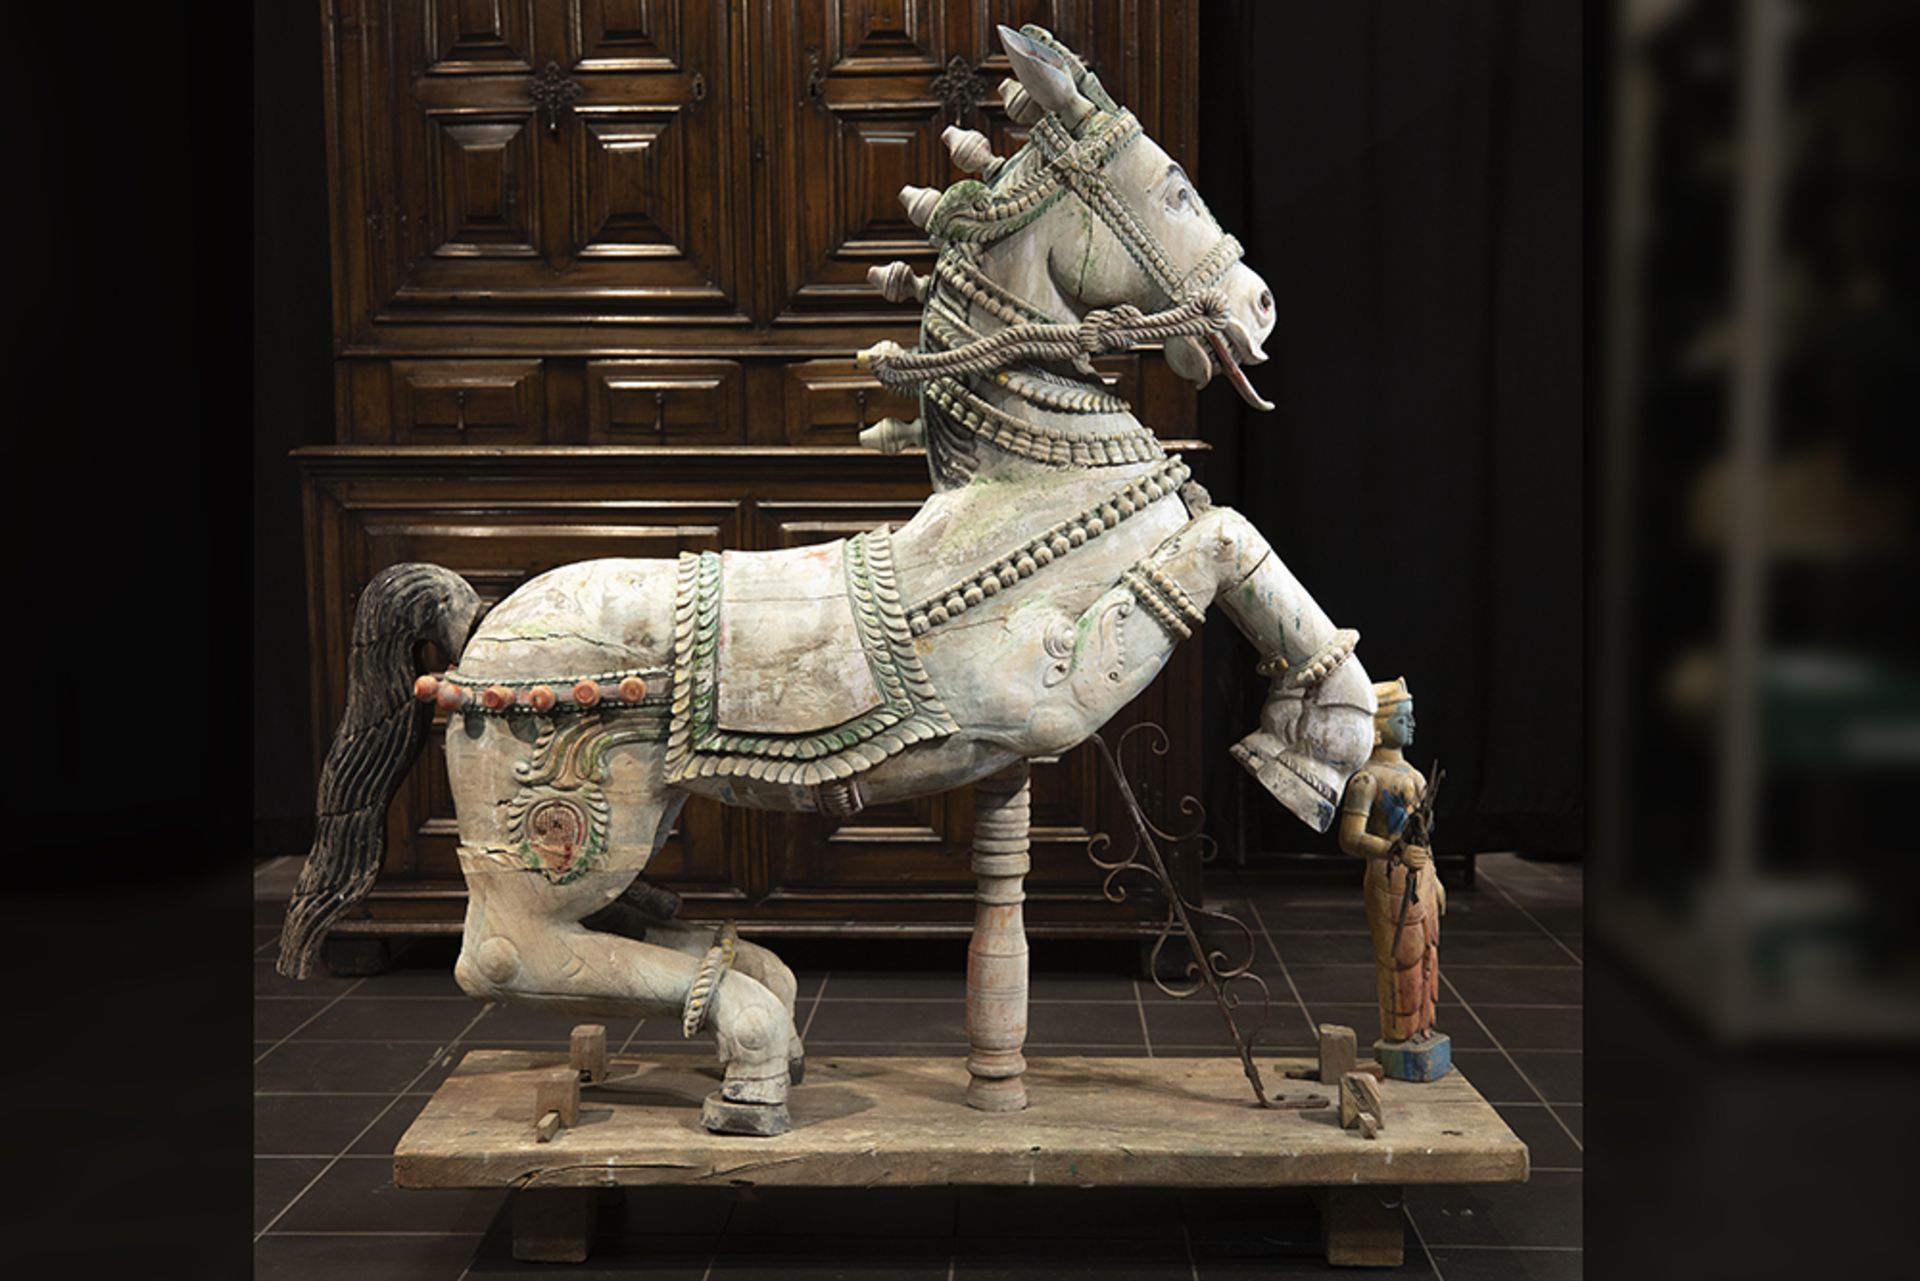 antique Indian "Horse" sculpture, part of a ceremonial Hindu carriage, in wood with remains of the